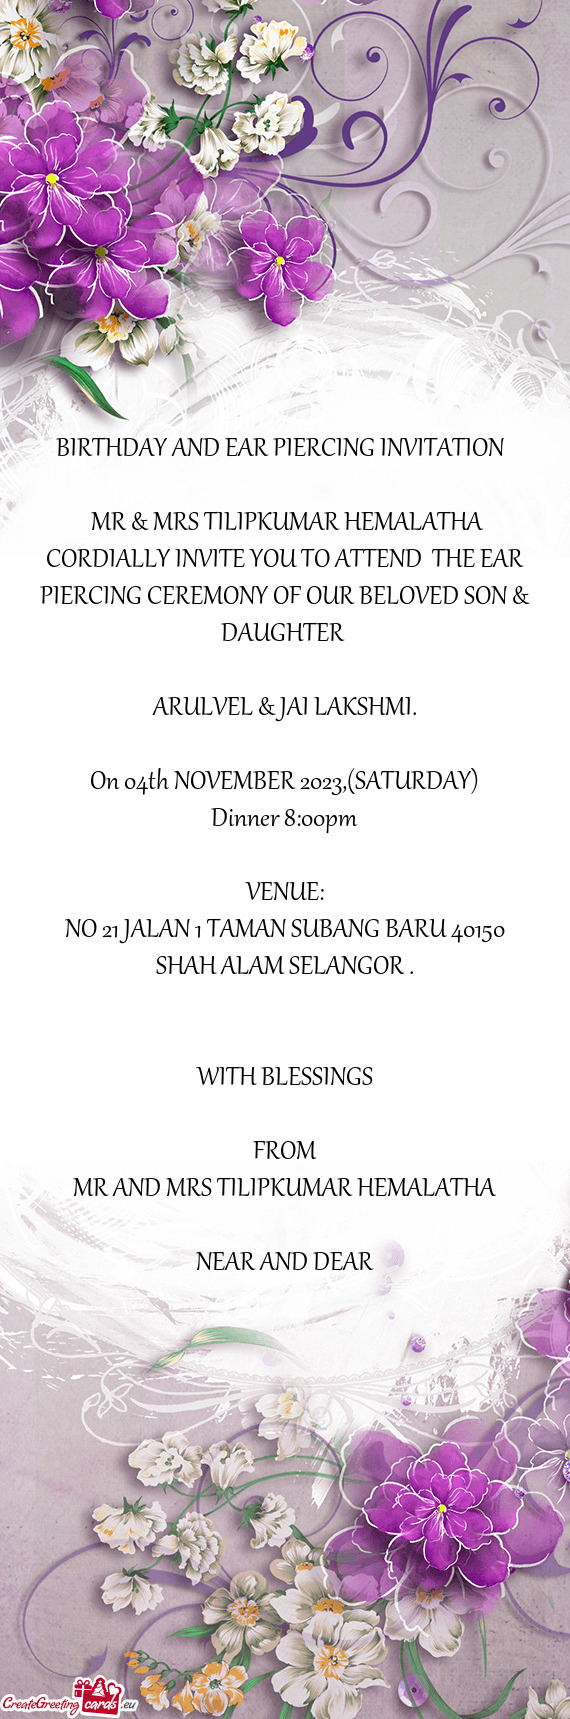 CORDIALLY INVITE YOU TO ATTEND THE EAR PIERCING CEREMONY OF OUR BELOVED SON & DAUGHTER